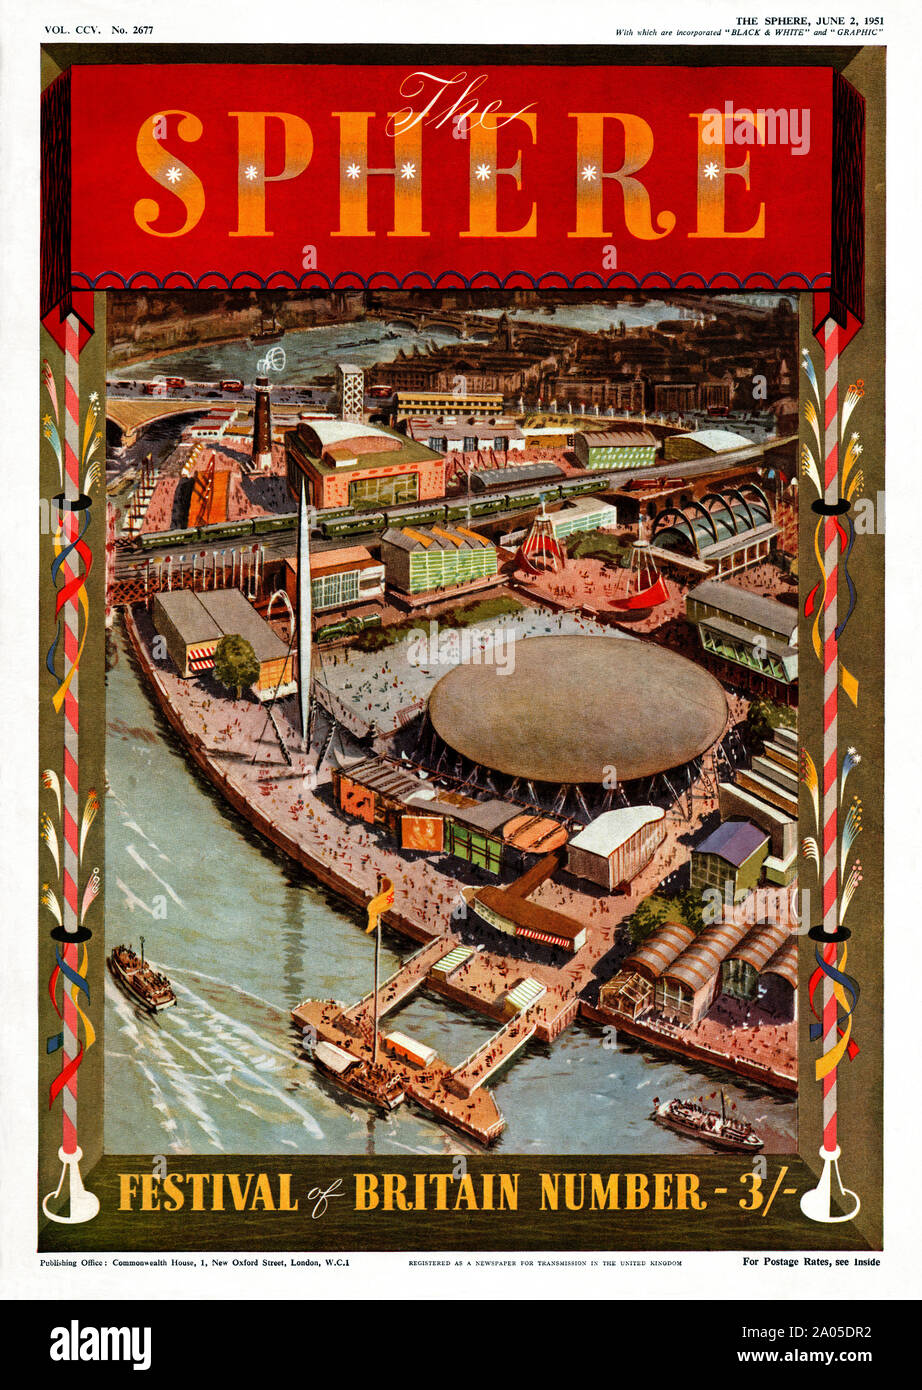 Cover of the Sphere magazine, 2 June 1951 - it was a special edition to mark the Festival of Britain and the cover illustration featured an aerial view of the exhibition site on the south bank of the River Thames in central London with the Skylon and Dome of Discovery in the centre Stock Photo